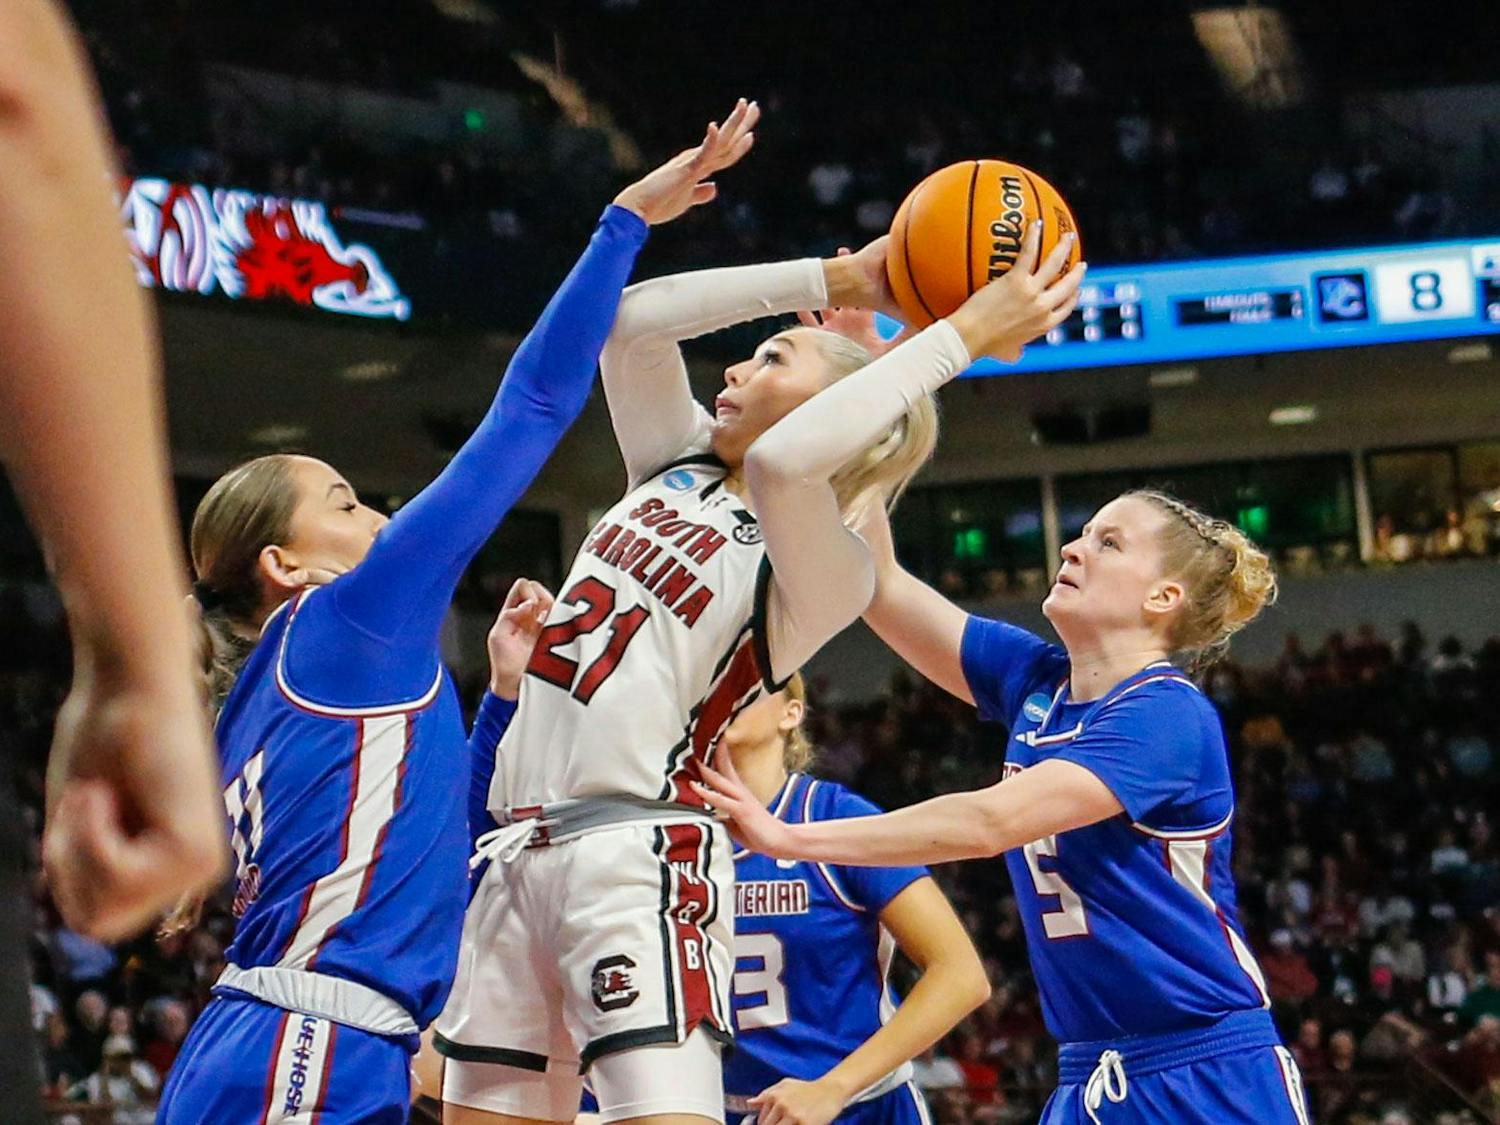 Sophomore forward Chloe Kitts goes up for a shot during South Carolina’s game against Presbyterian in round one of the 2024 NCAA Women’s Tournament on March 22, 2024. Kitts led the team in scoring with 21 points in the Gamecocks’ 91-39 victory over the Blue Hose.